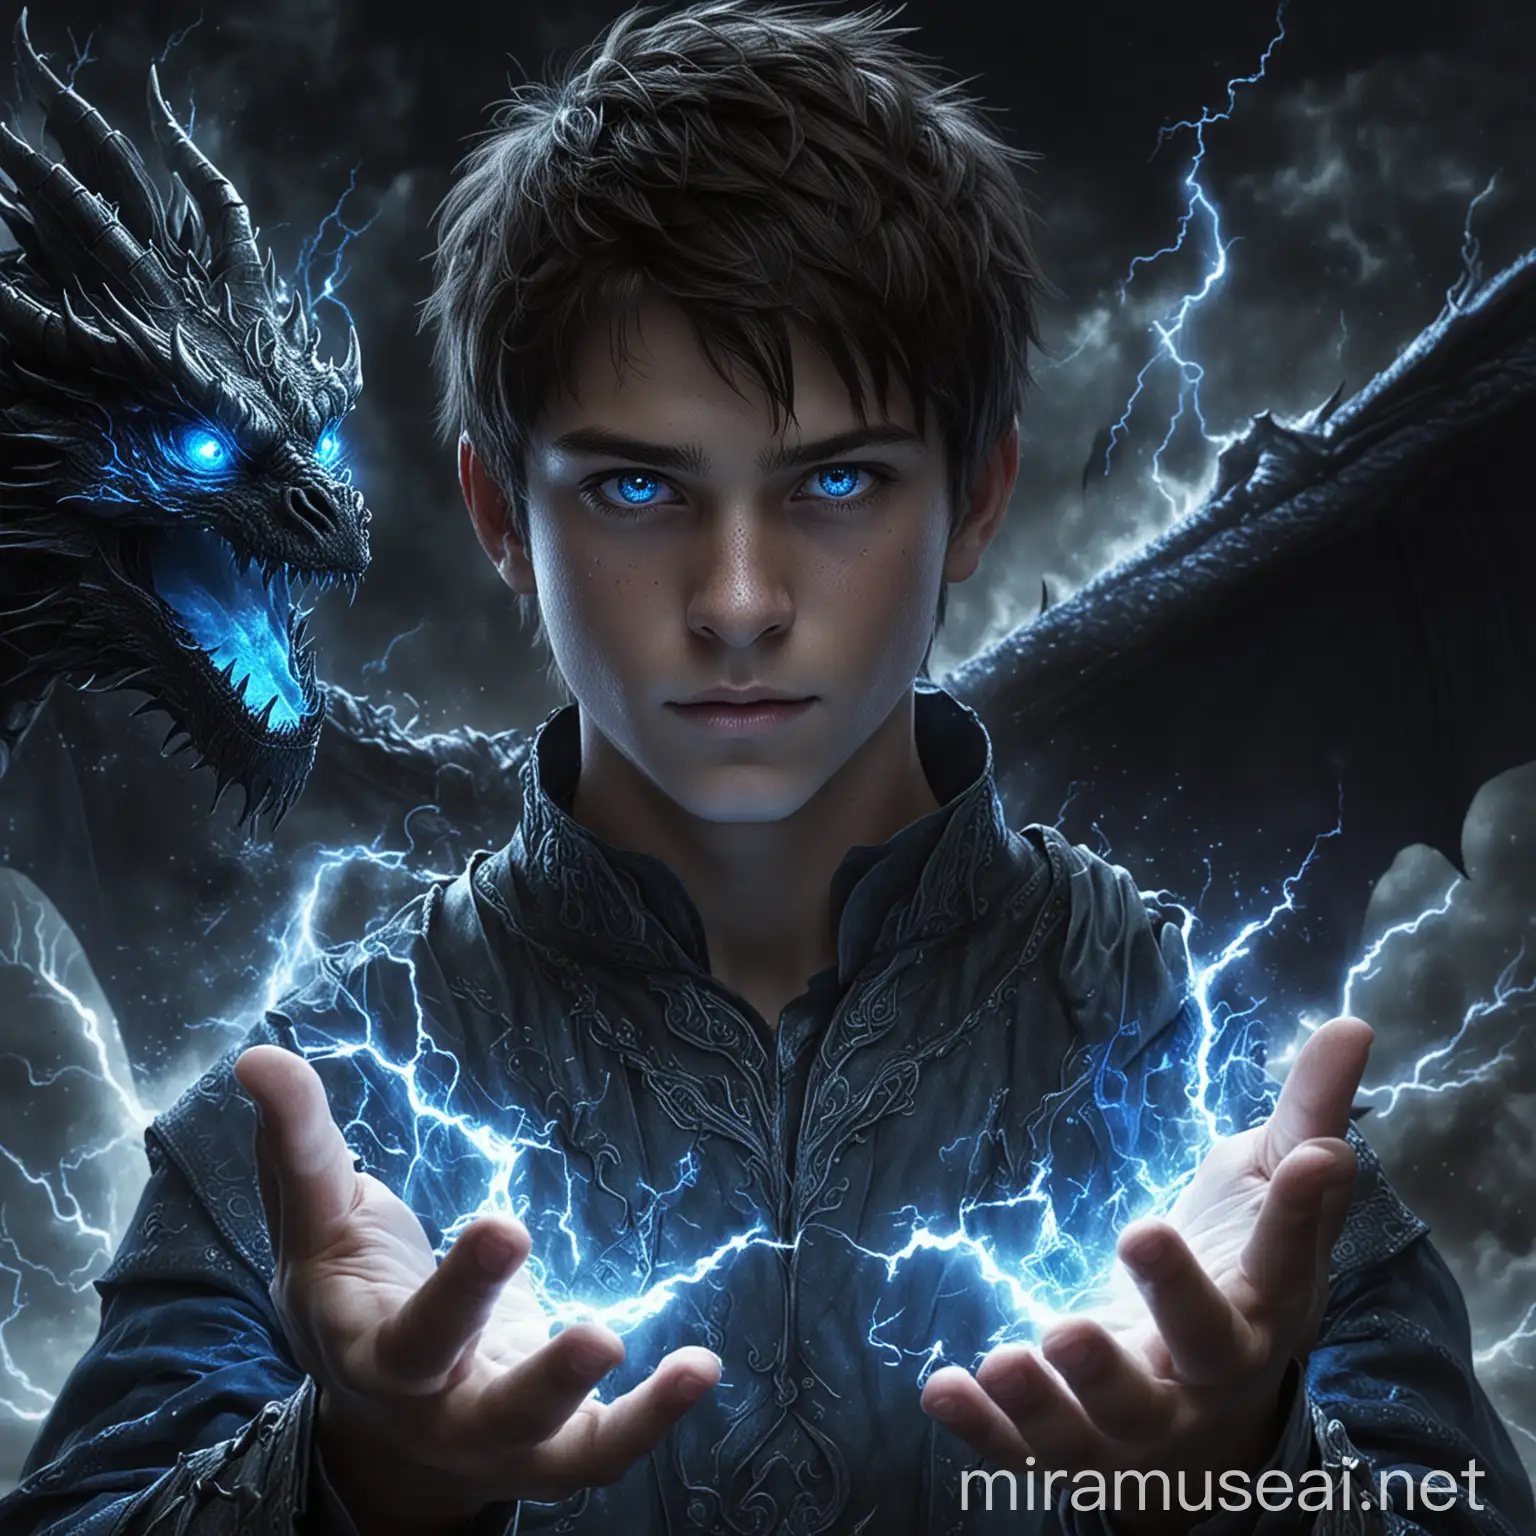 generate a realistic image of a 17-year old boy who is a prince, there is blue lightning coming out of his hands, and behind him there is a black dragon with blue eyes